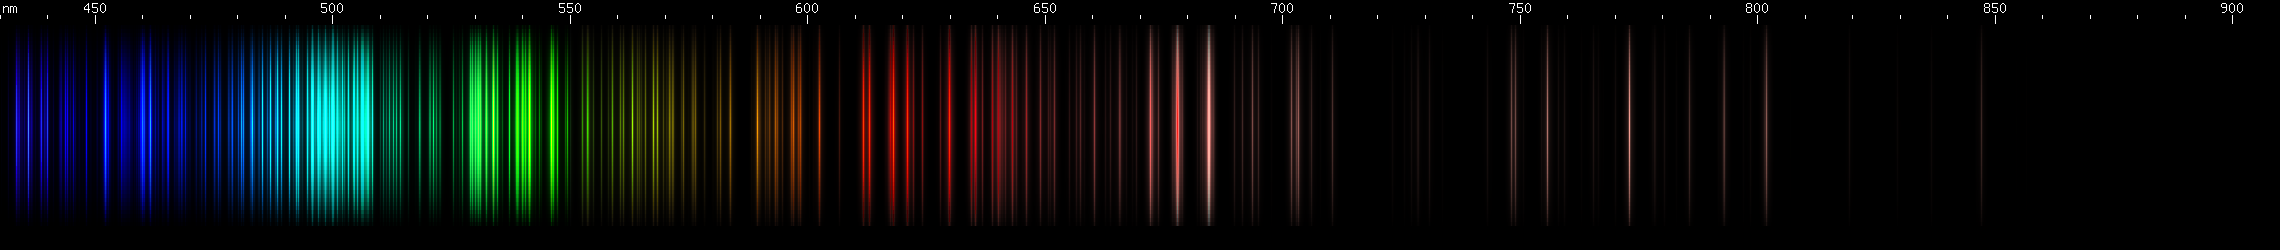 Spectral lines of Thulium.